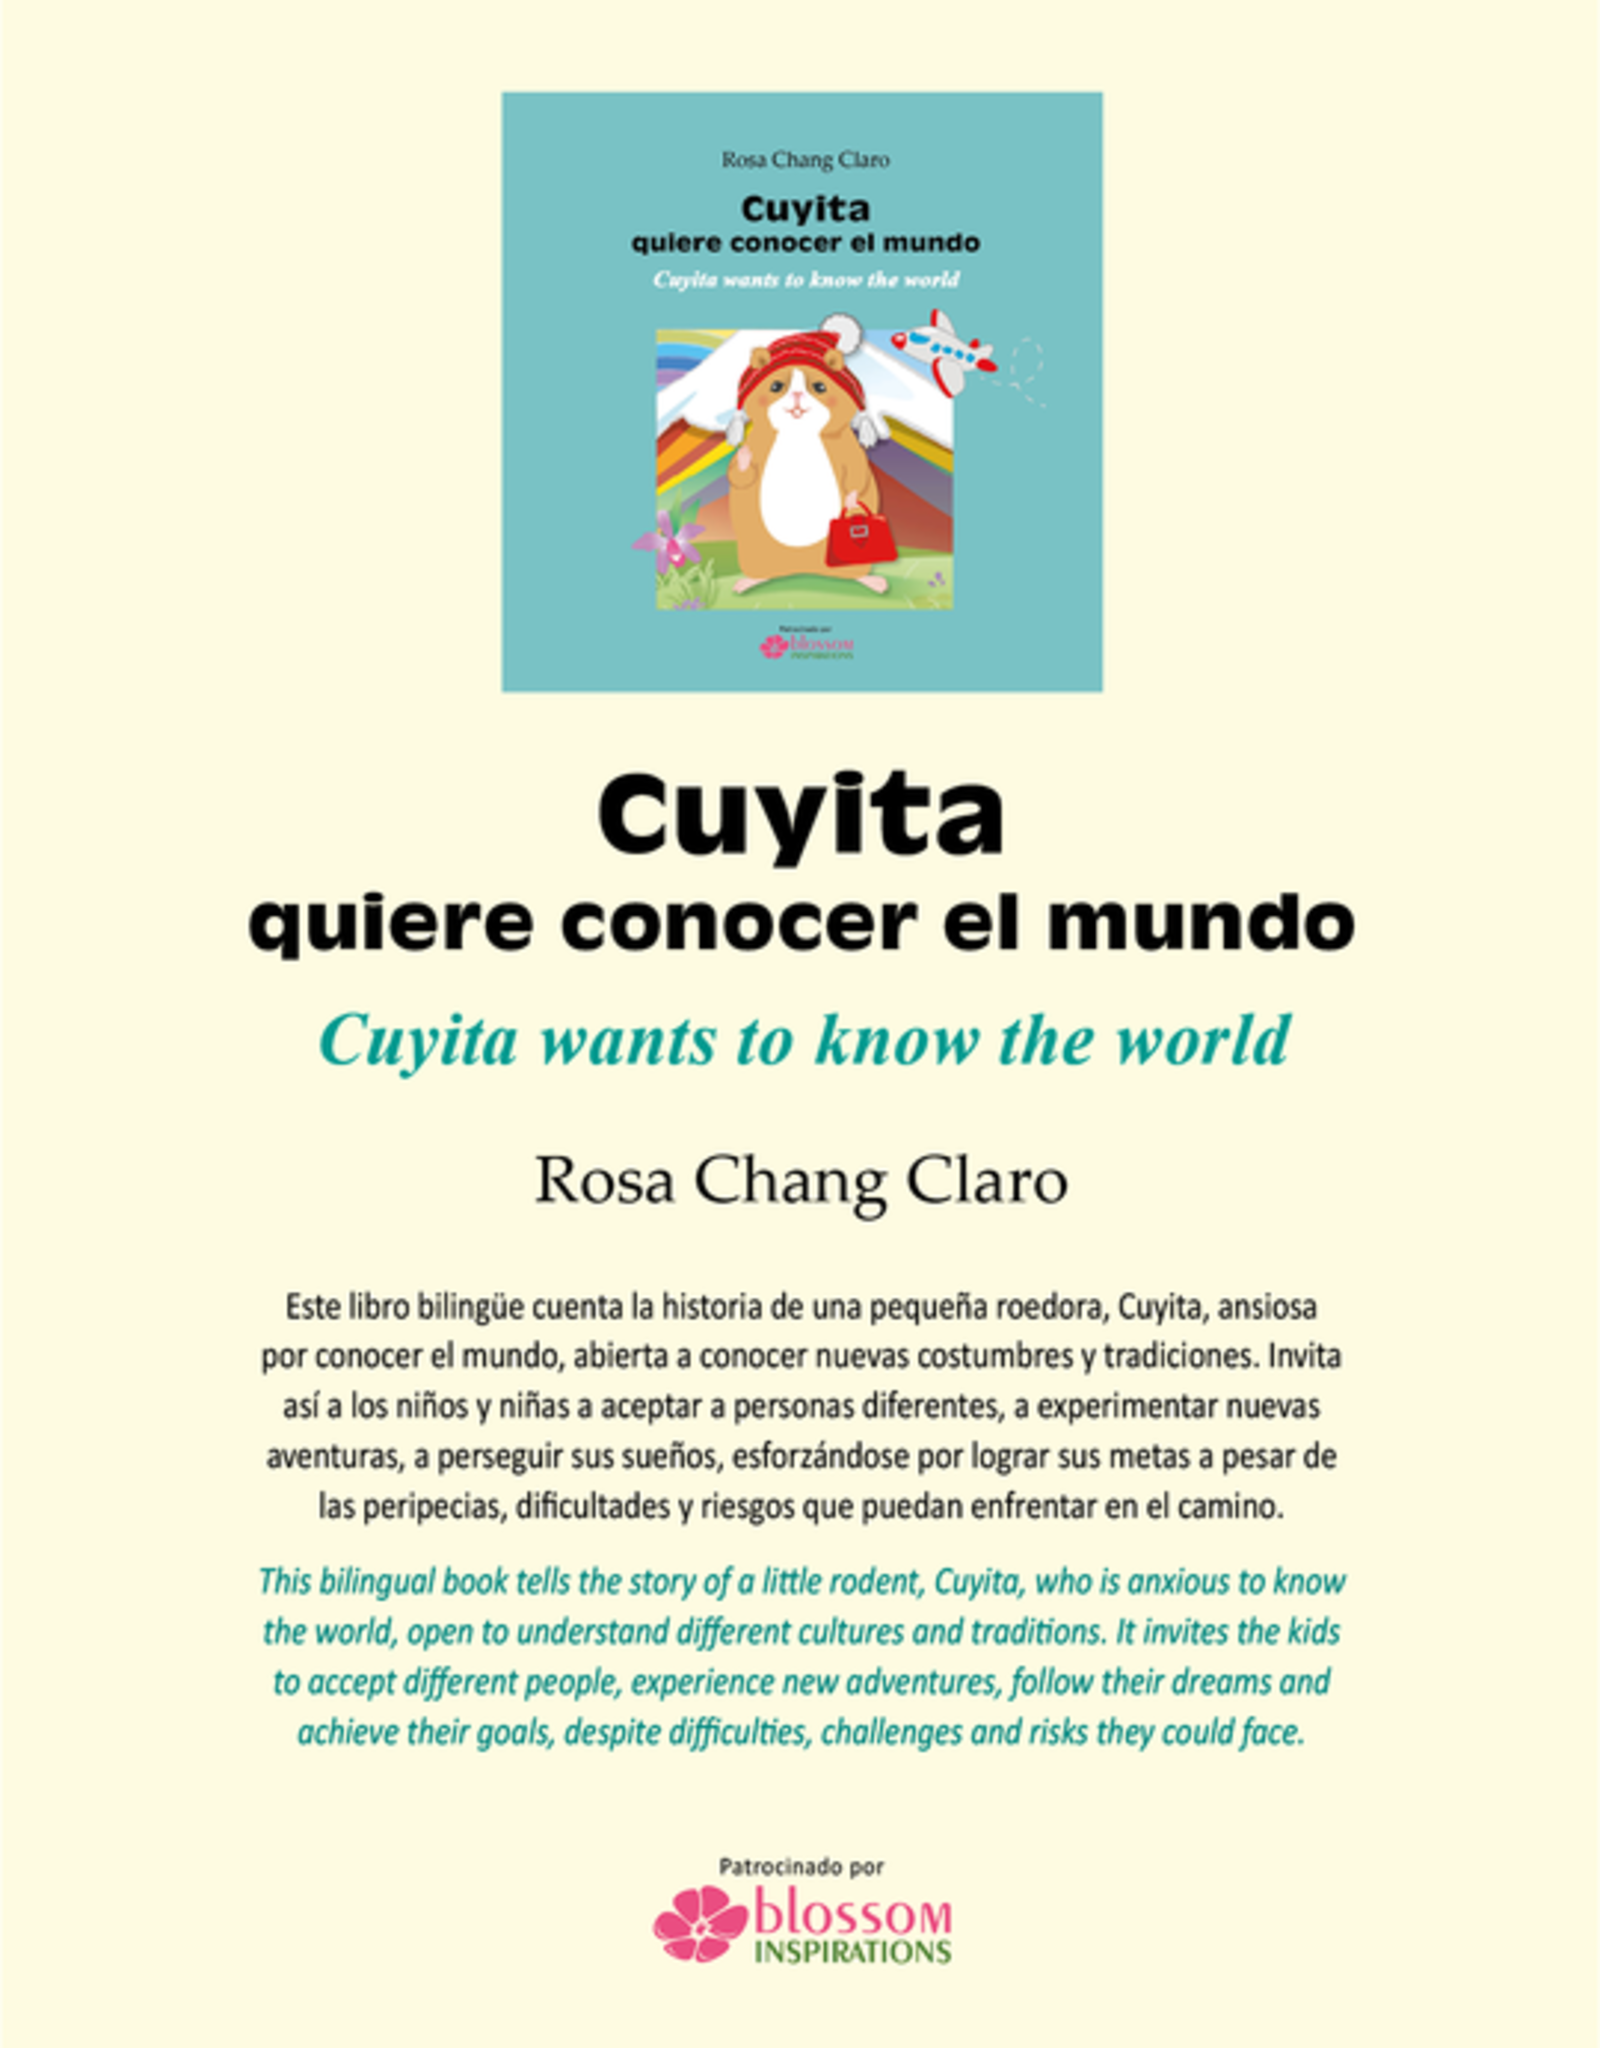 Blossom Inspirations Cuyita Wants to Know the World - Bilingual Fair Trade Book